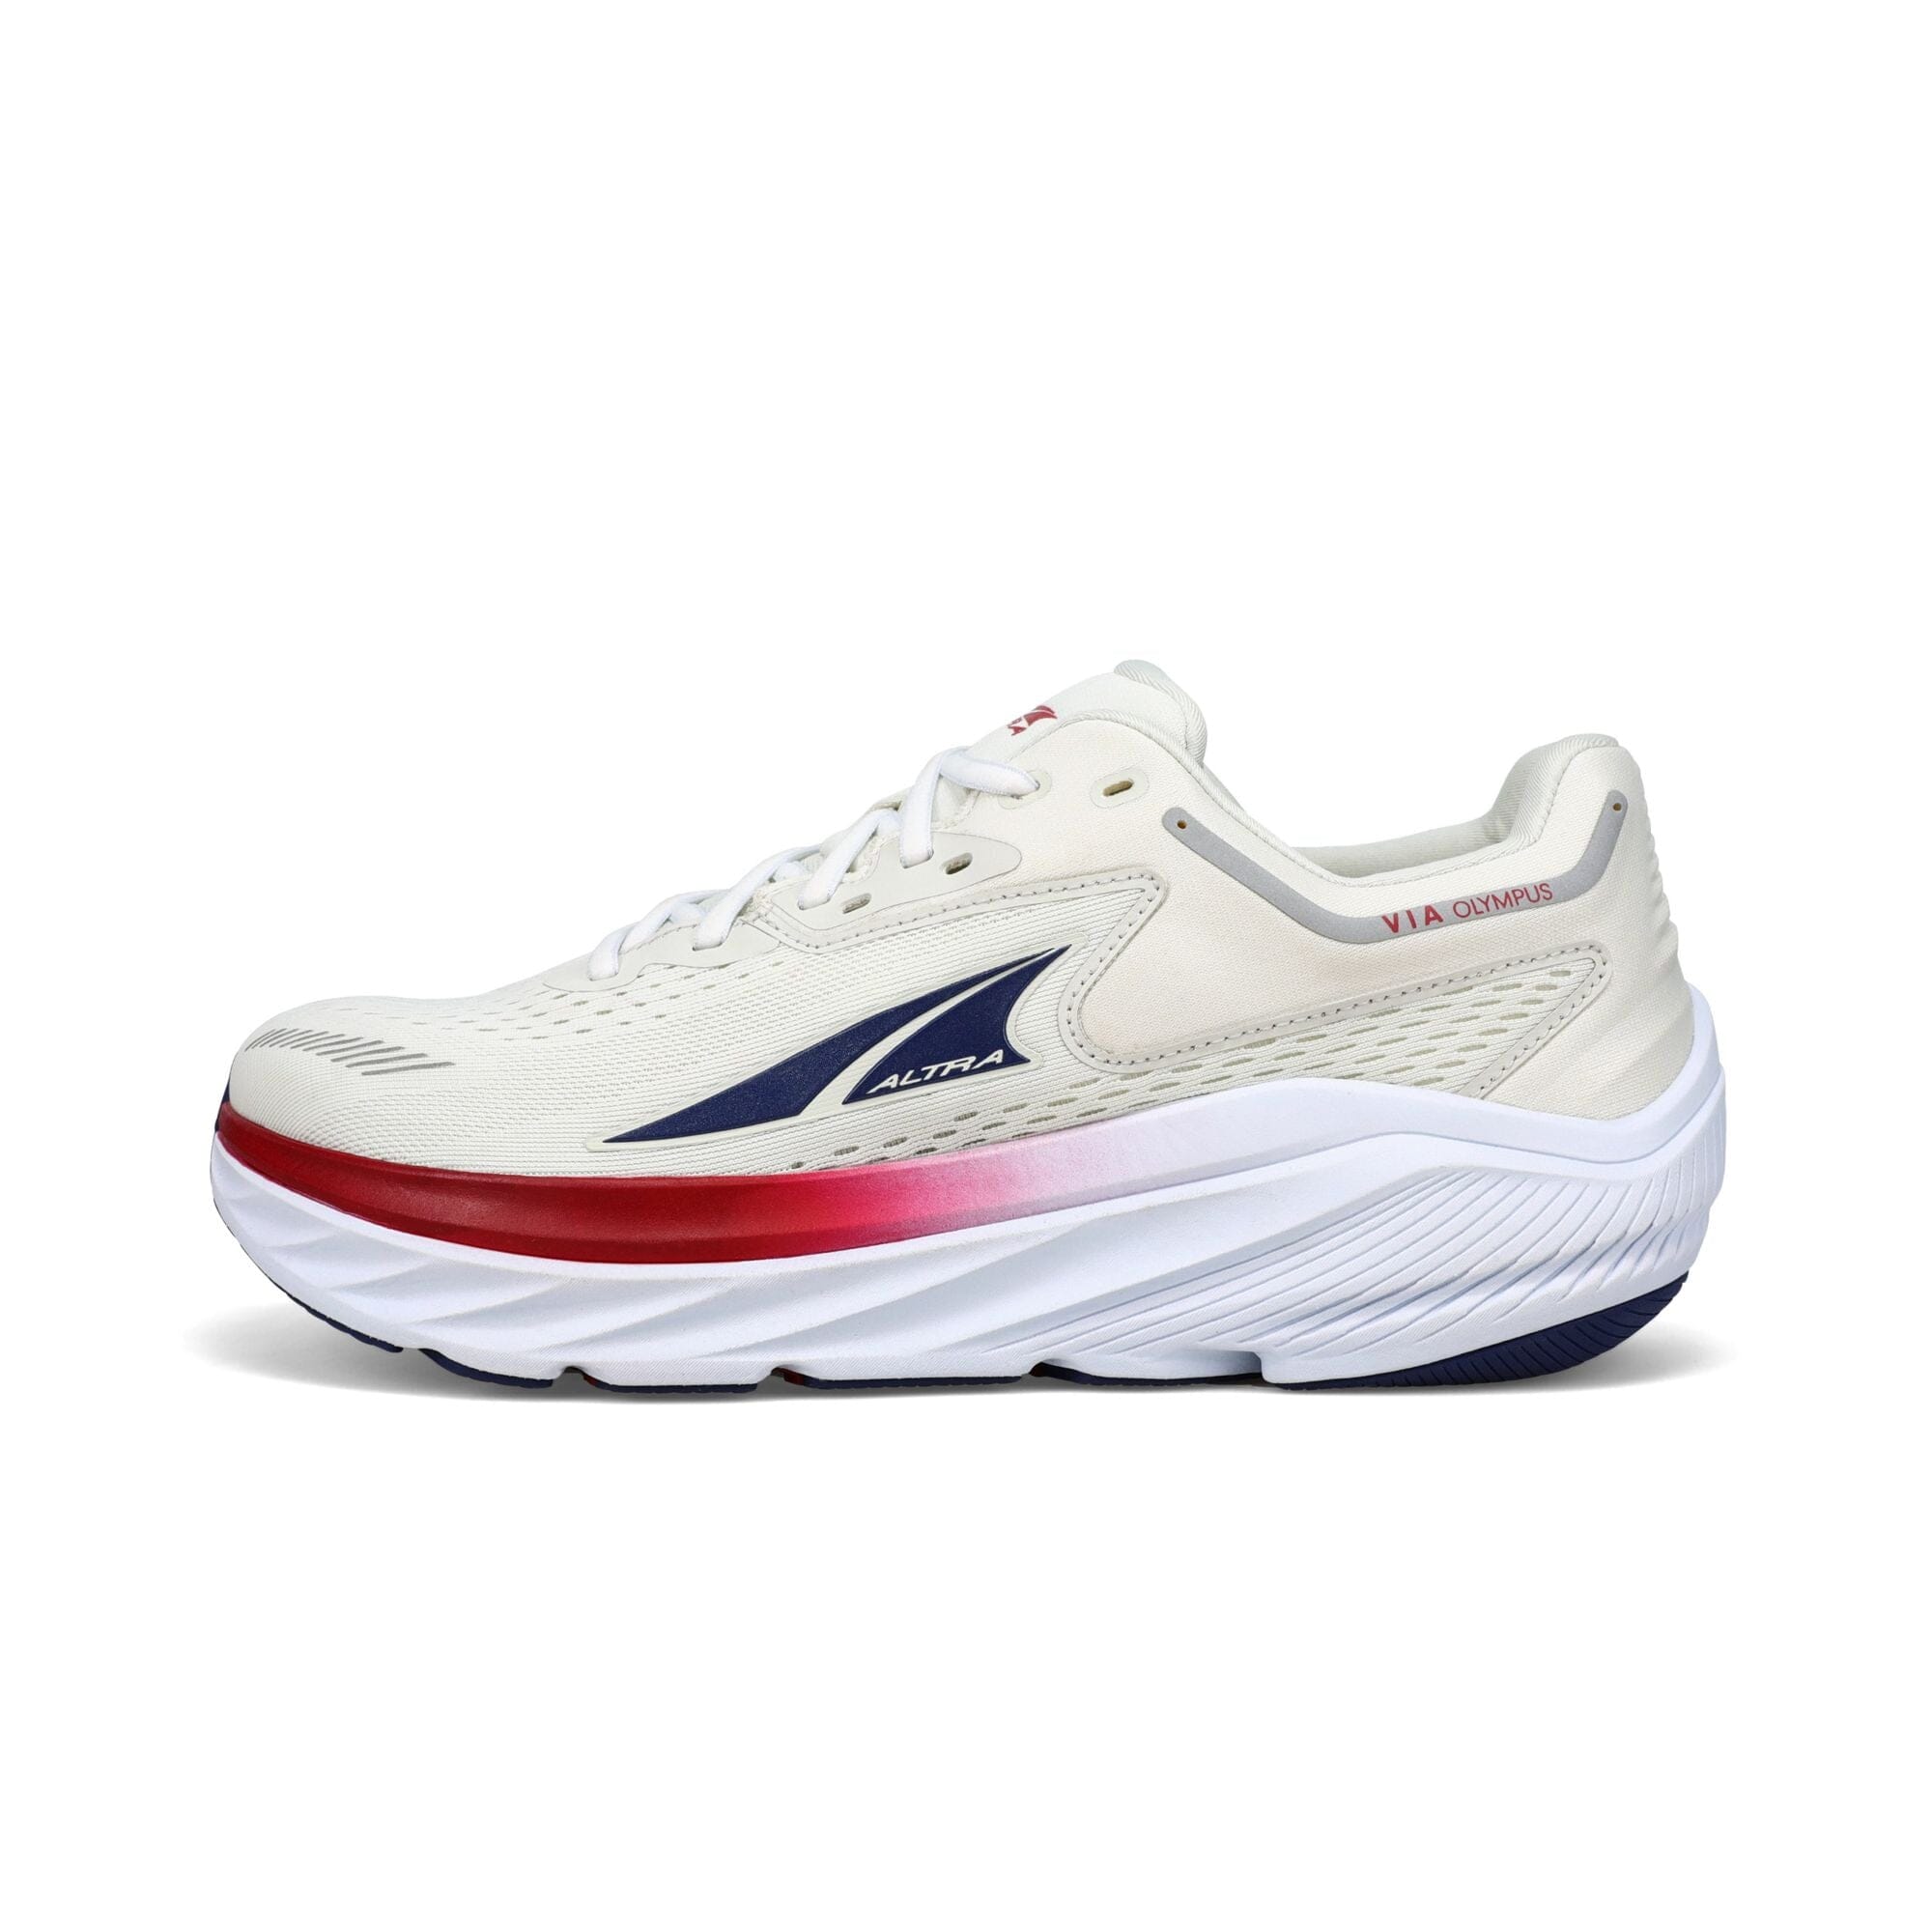 Altra Women's VIA Olympus Road Running Shoes 